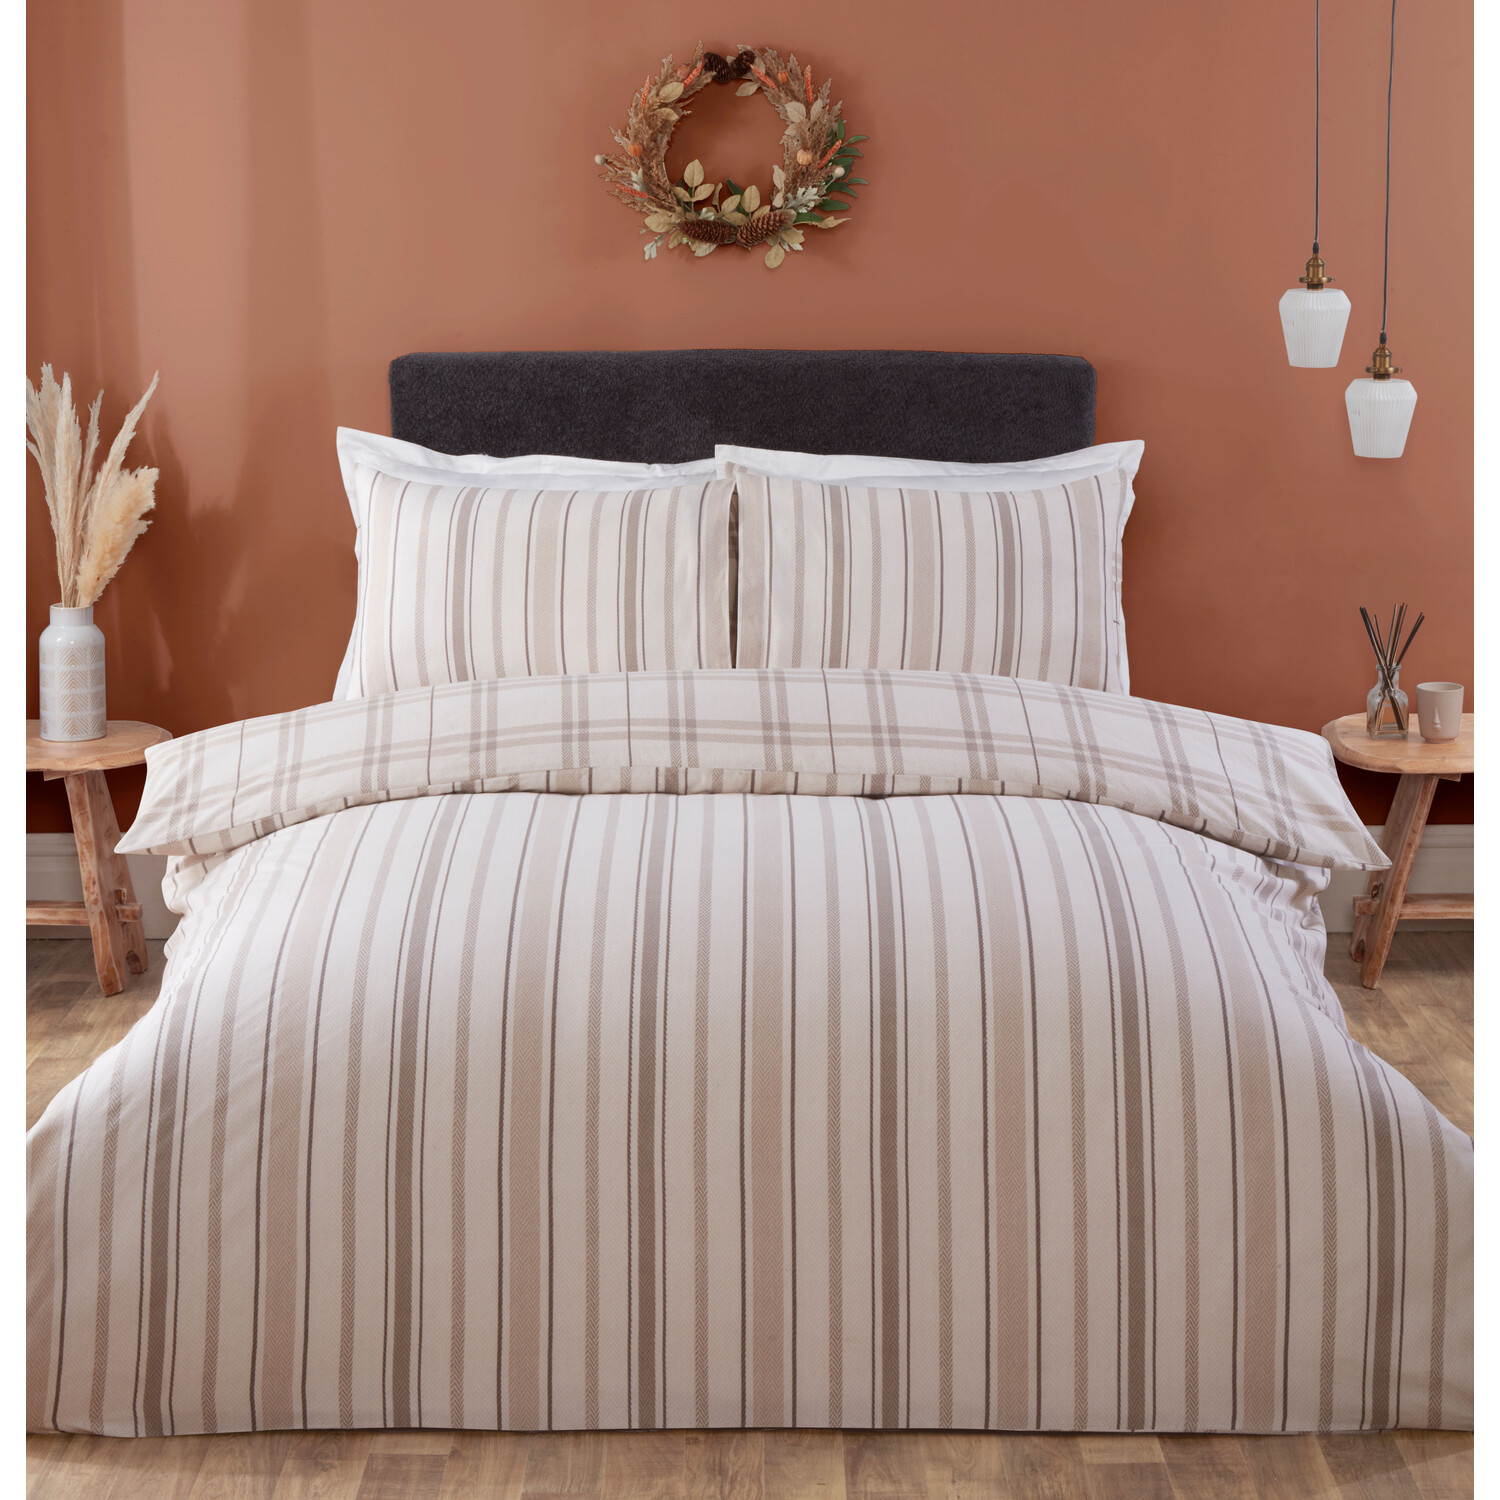 Fall Autumn Single Brown Check Duvet Cover and Pillowcase Set Image 3